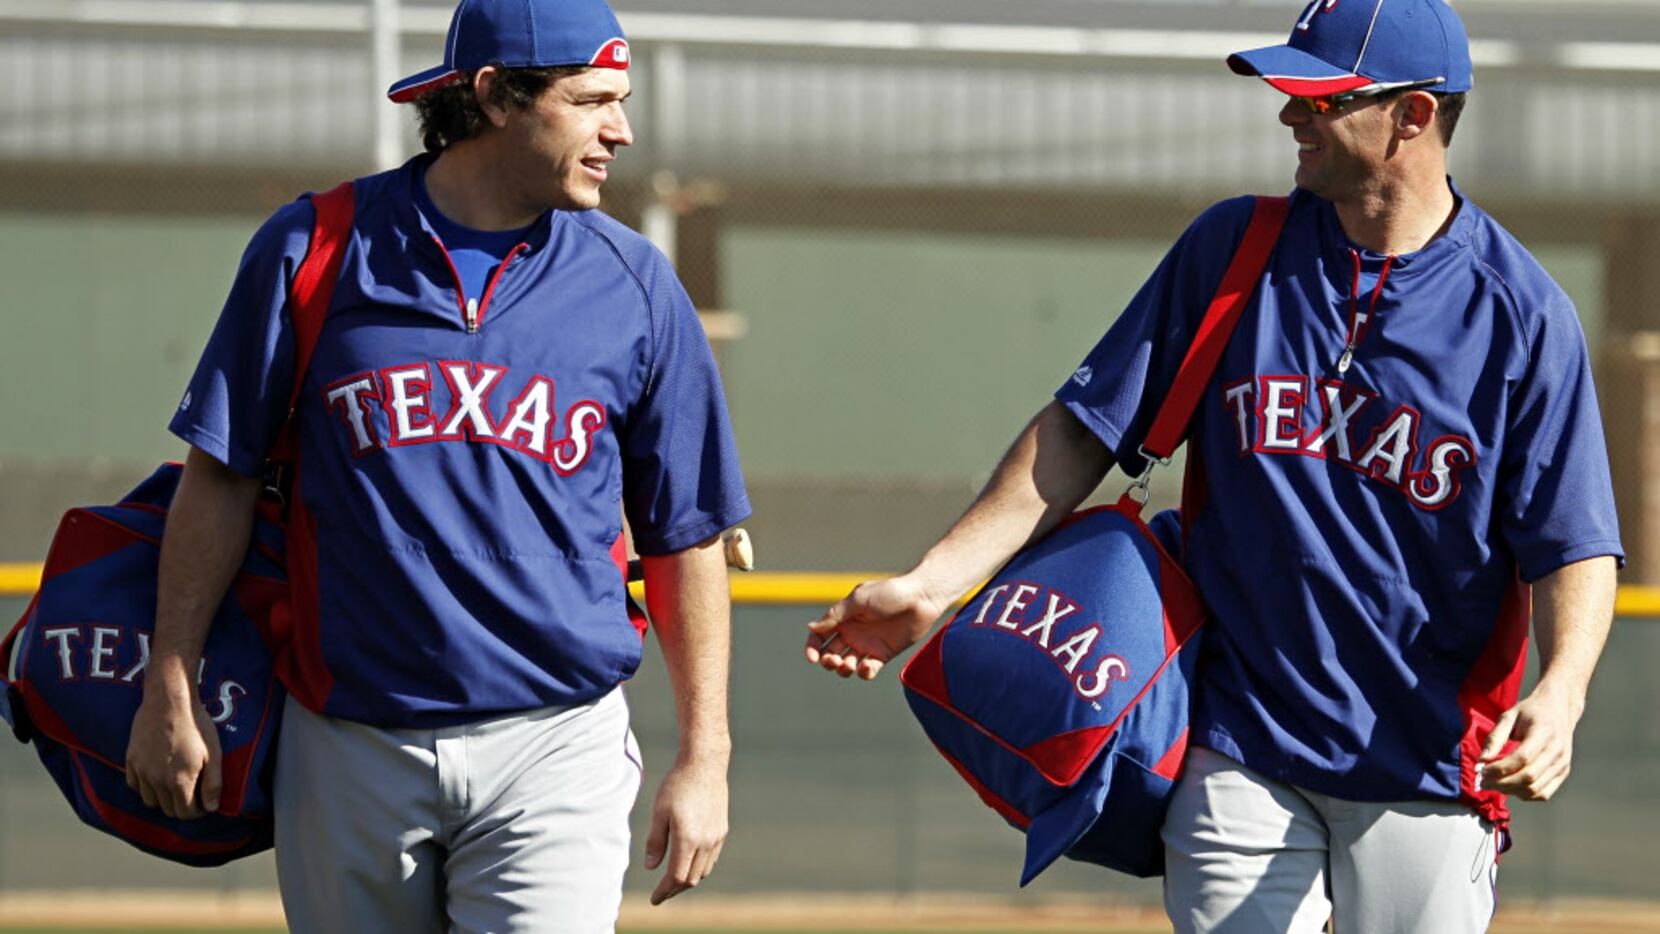 Is Ian Kinsler really the new face of the Texas Rangers?